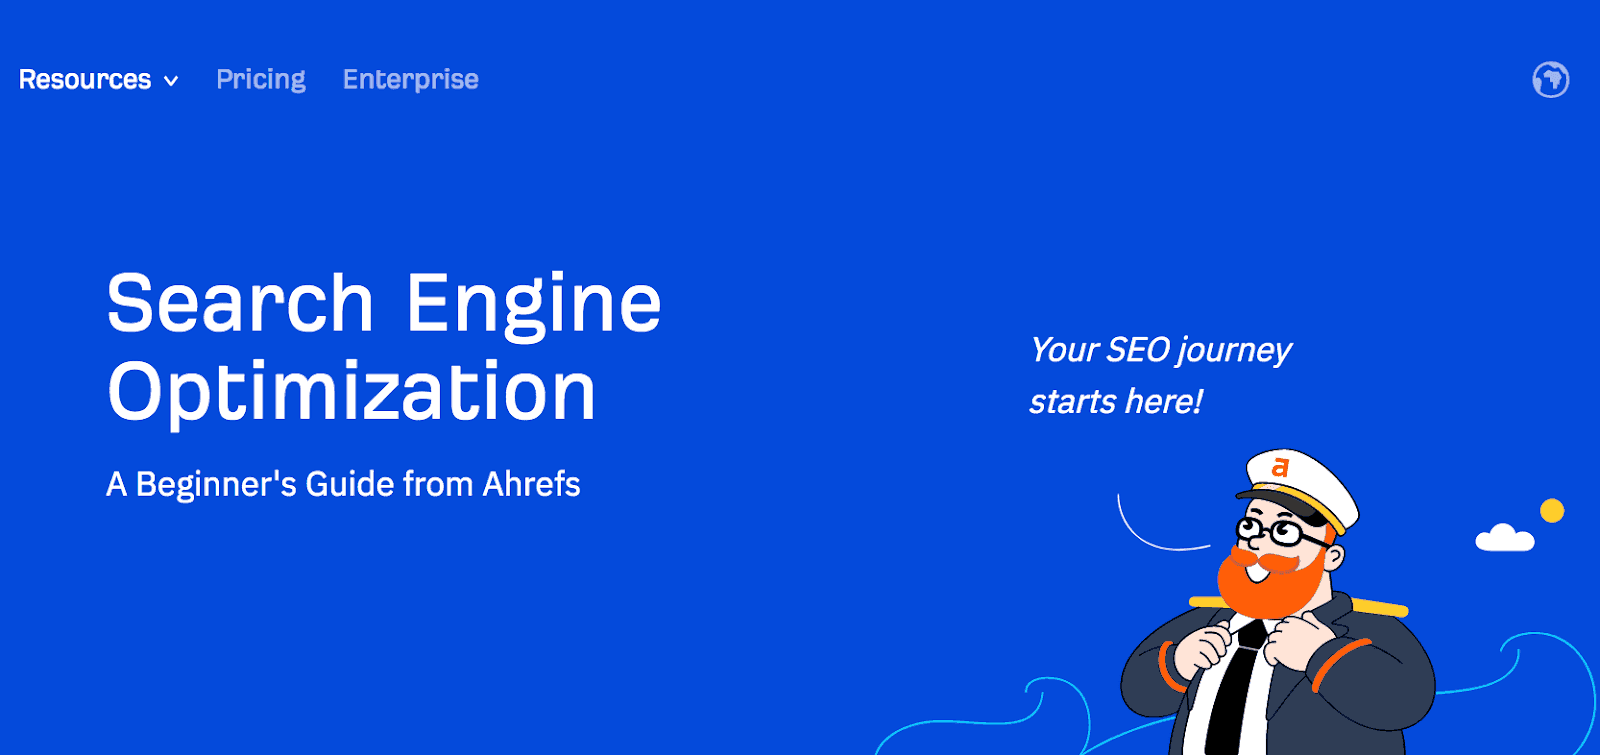 Search Engine Optimization - Beginner's Guide from Ahrefs blog post